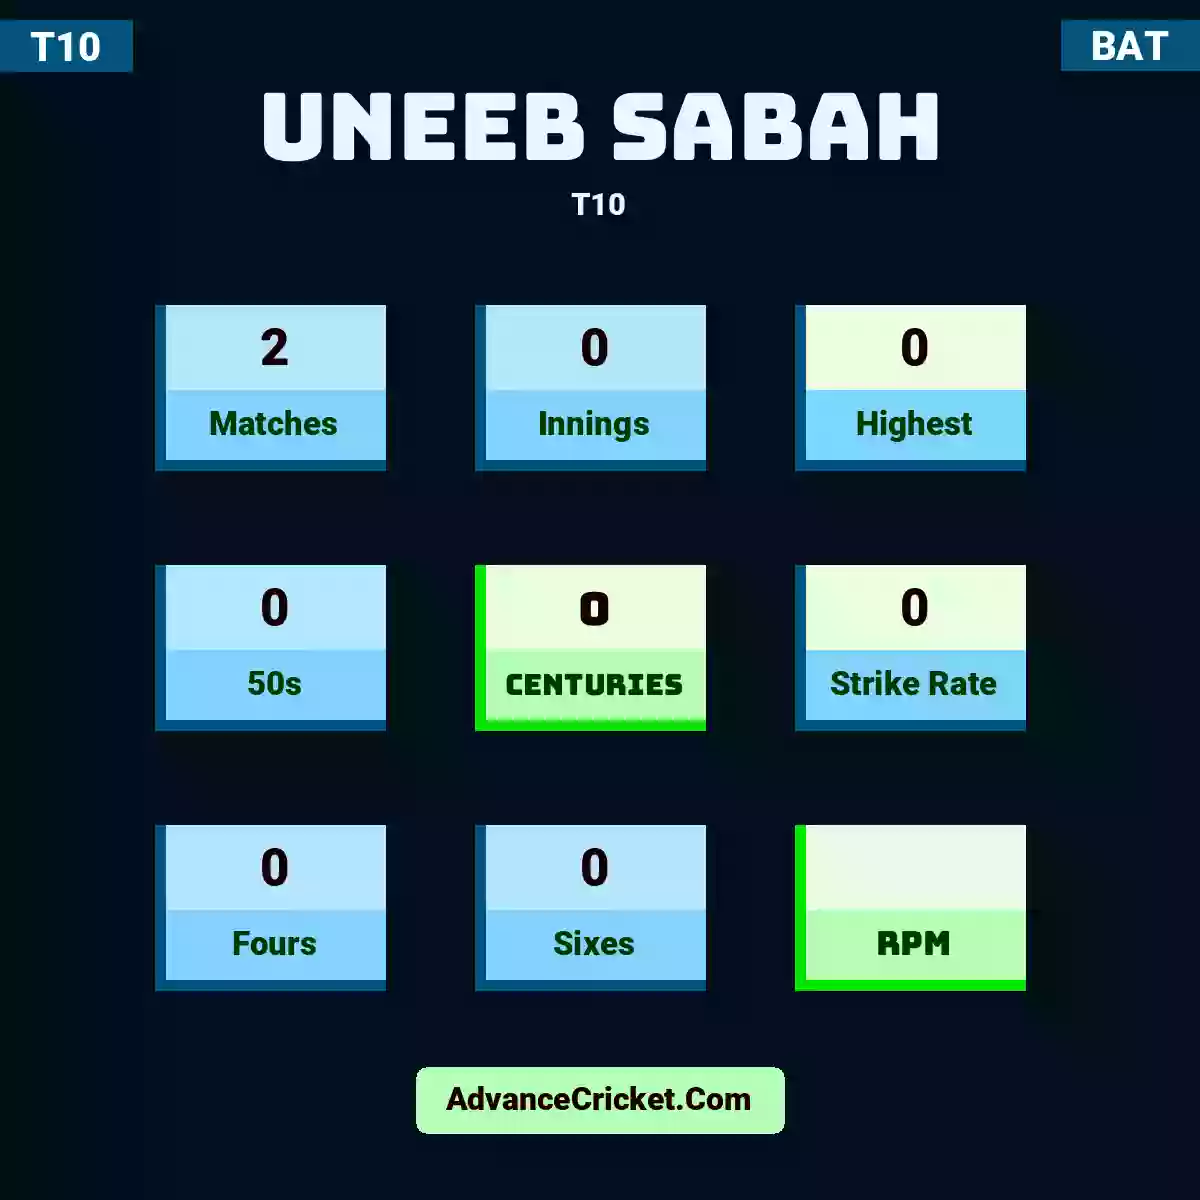 Uneeb Sabah T10 , Uneeb Sabah played 2 matches, scored 0 runs as highest, 0 half-centuries, and 0 centuries, with a strike rate of 0. U.Sabah hit 0 fours and 0 sixes.